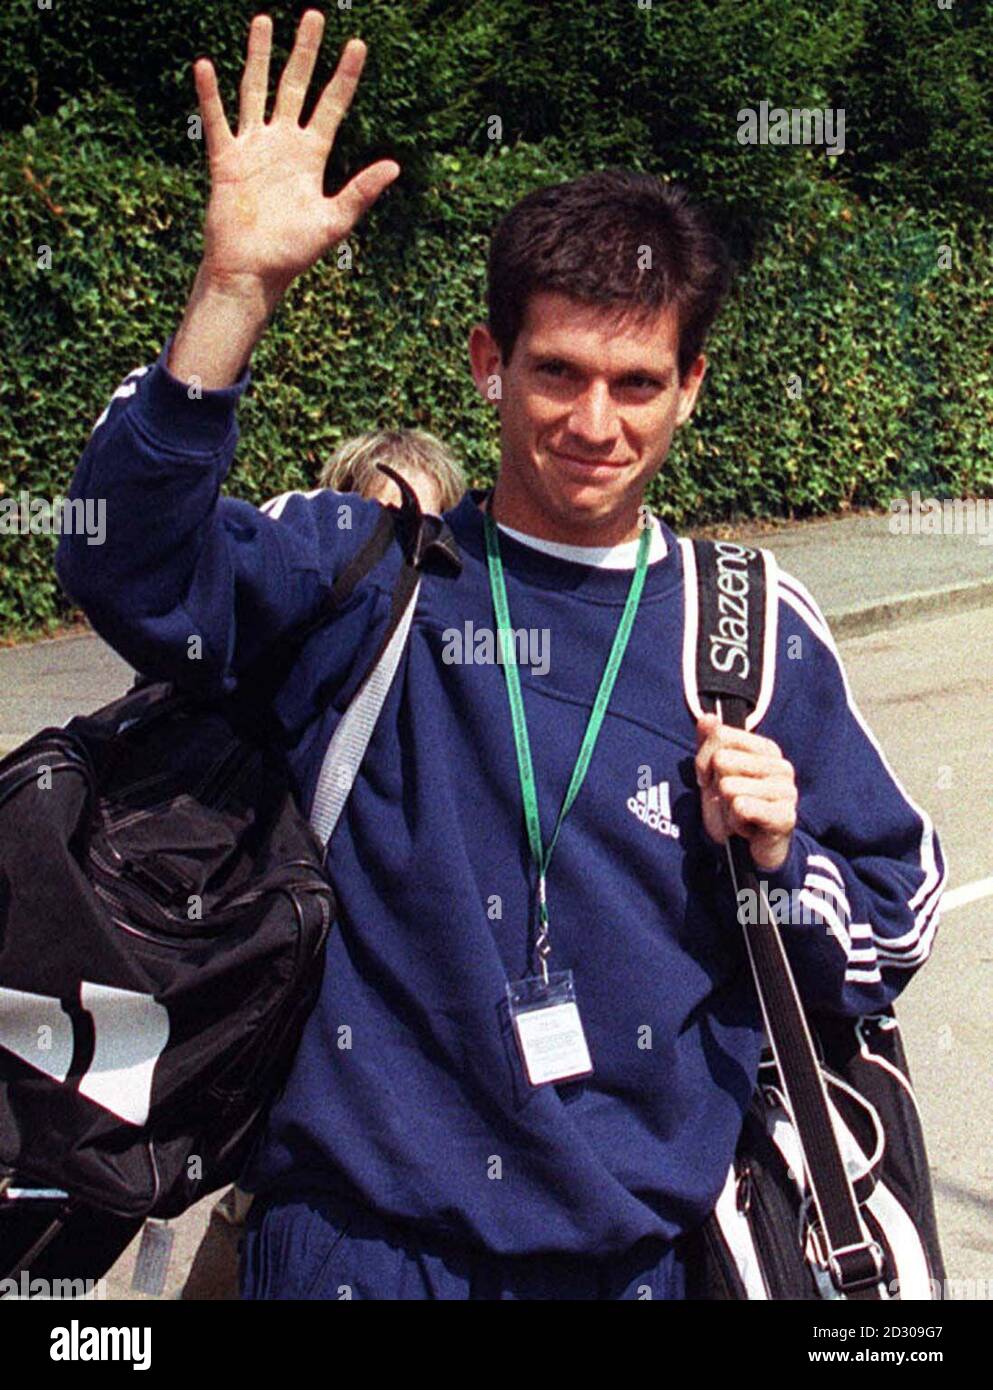 No Commercial Use: British tennis star Tim Henman arrives at the Wimbledon Tennis Championships ahead of his match against American Jim Courier. Stock Photo